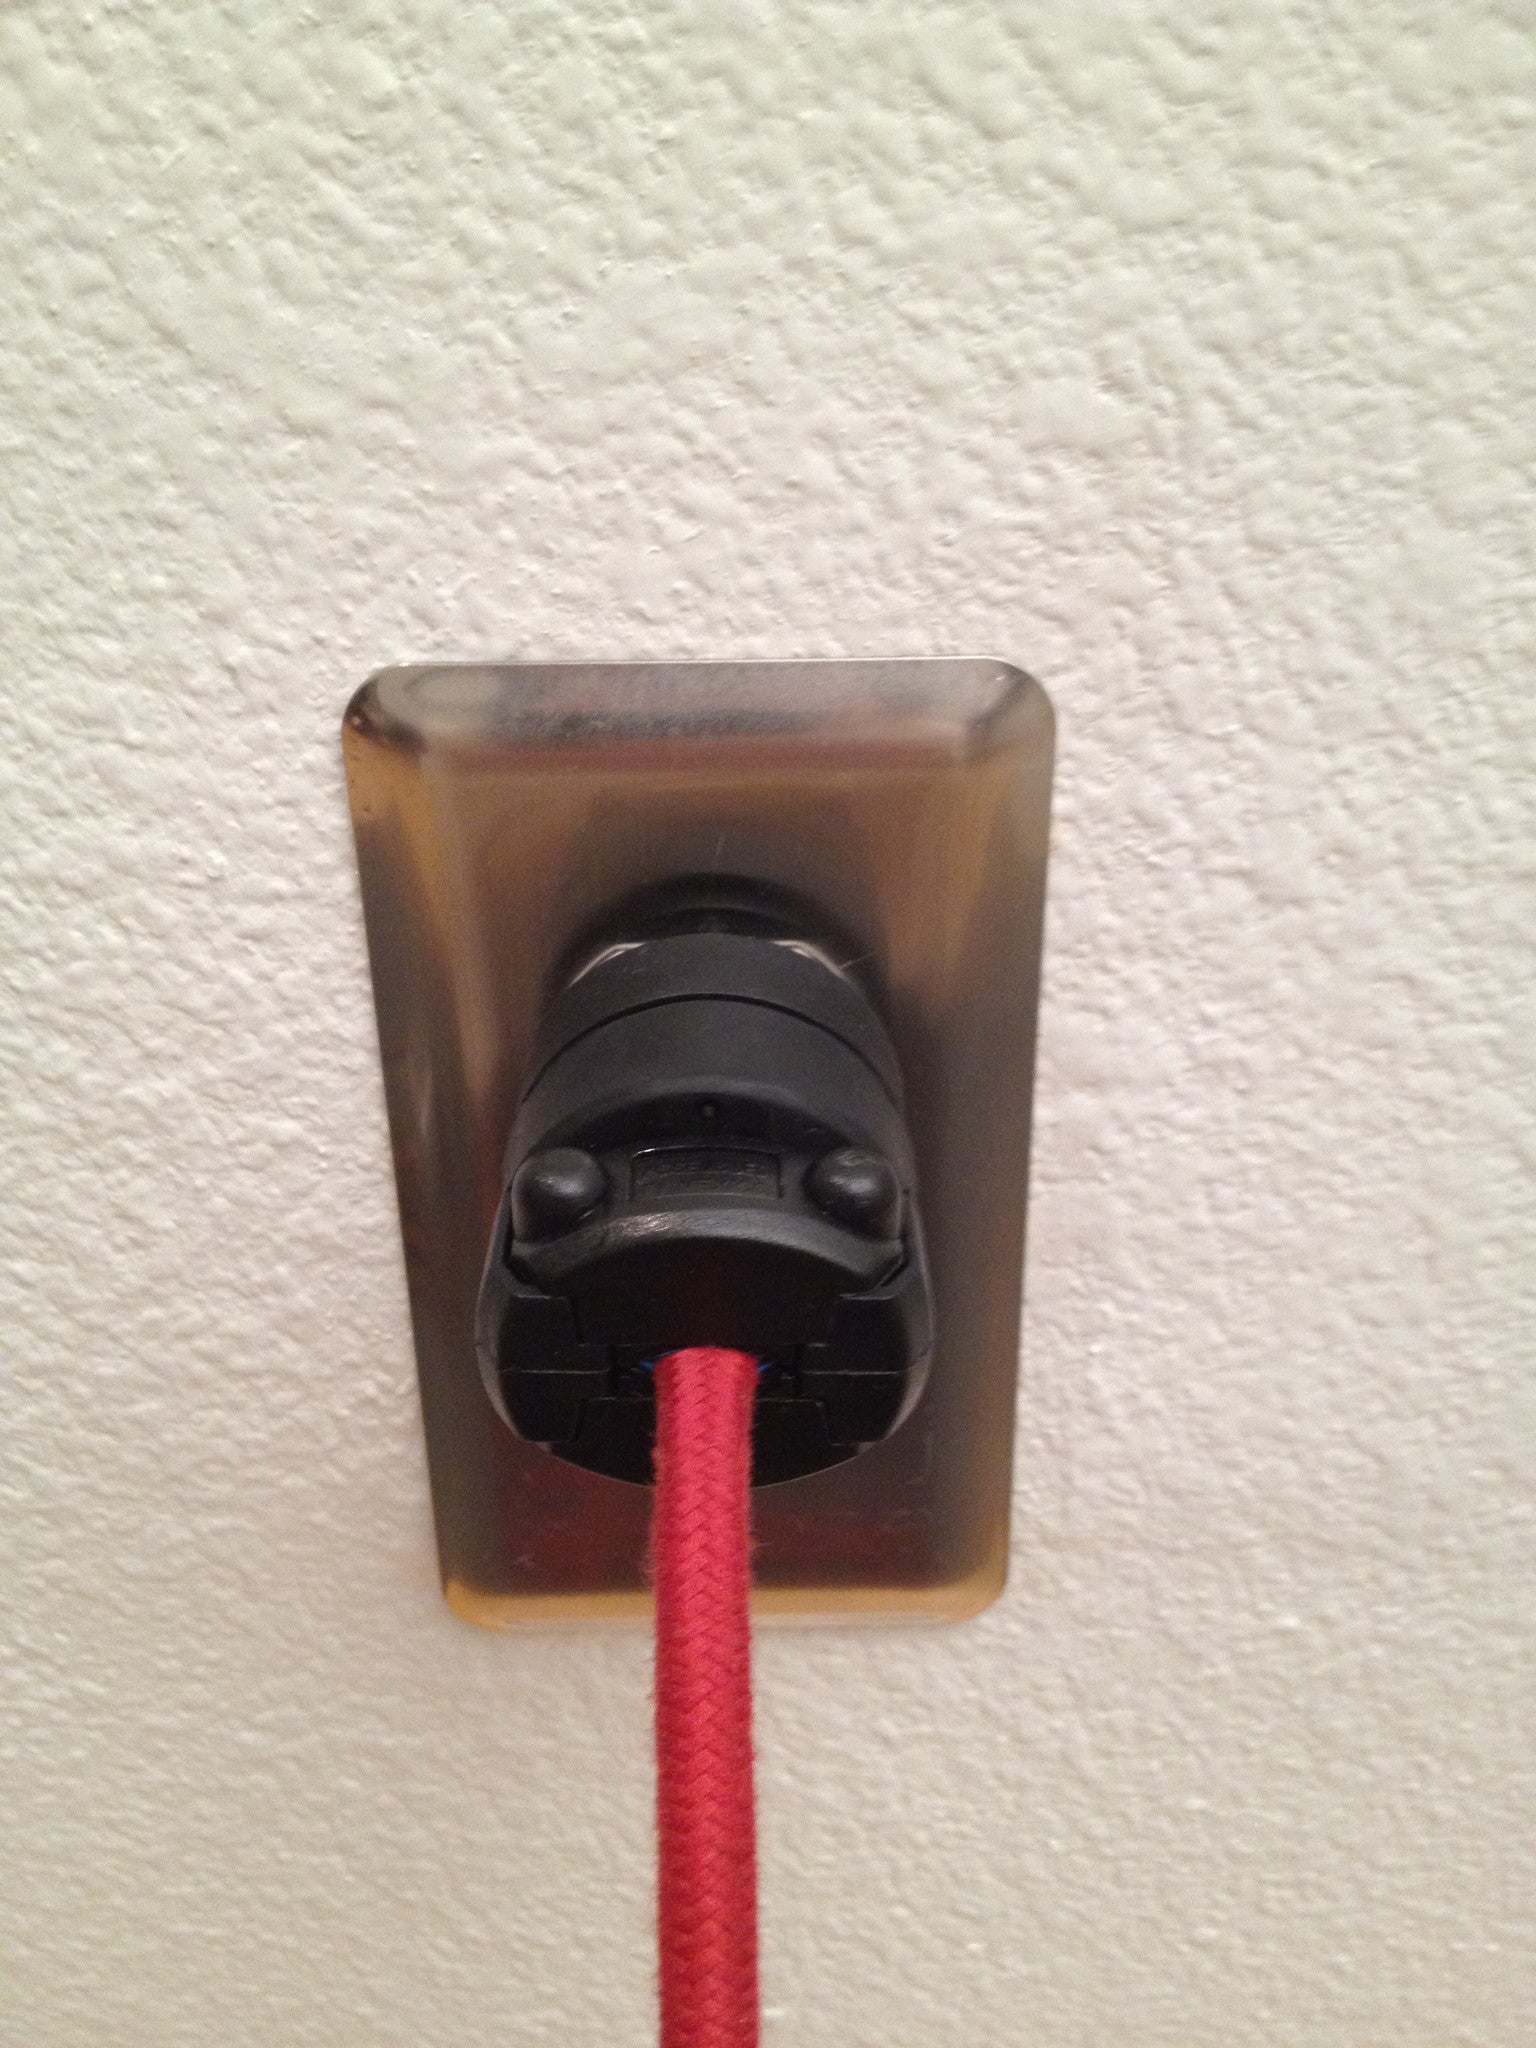 Extō 4077th Green - A Modern Dual-Tamper-Resistant Outlet, 15-AMP Extension Cord